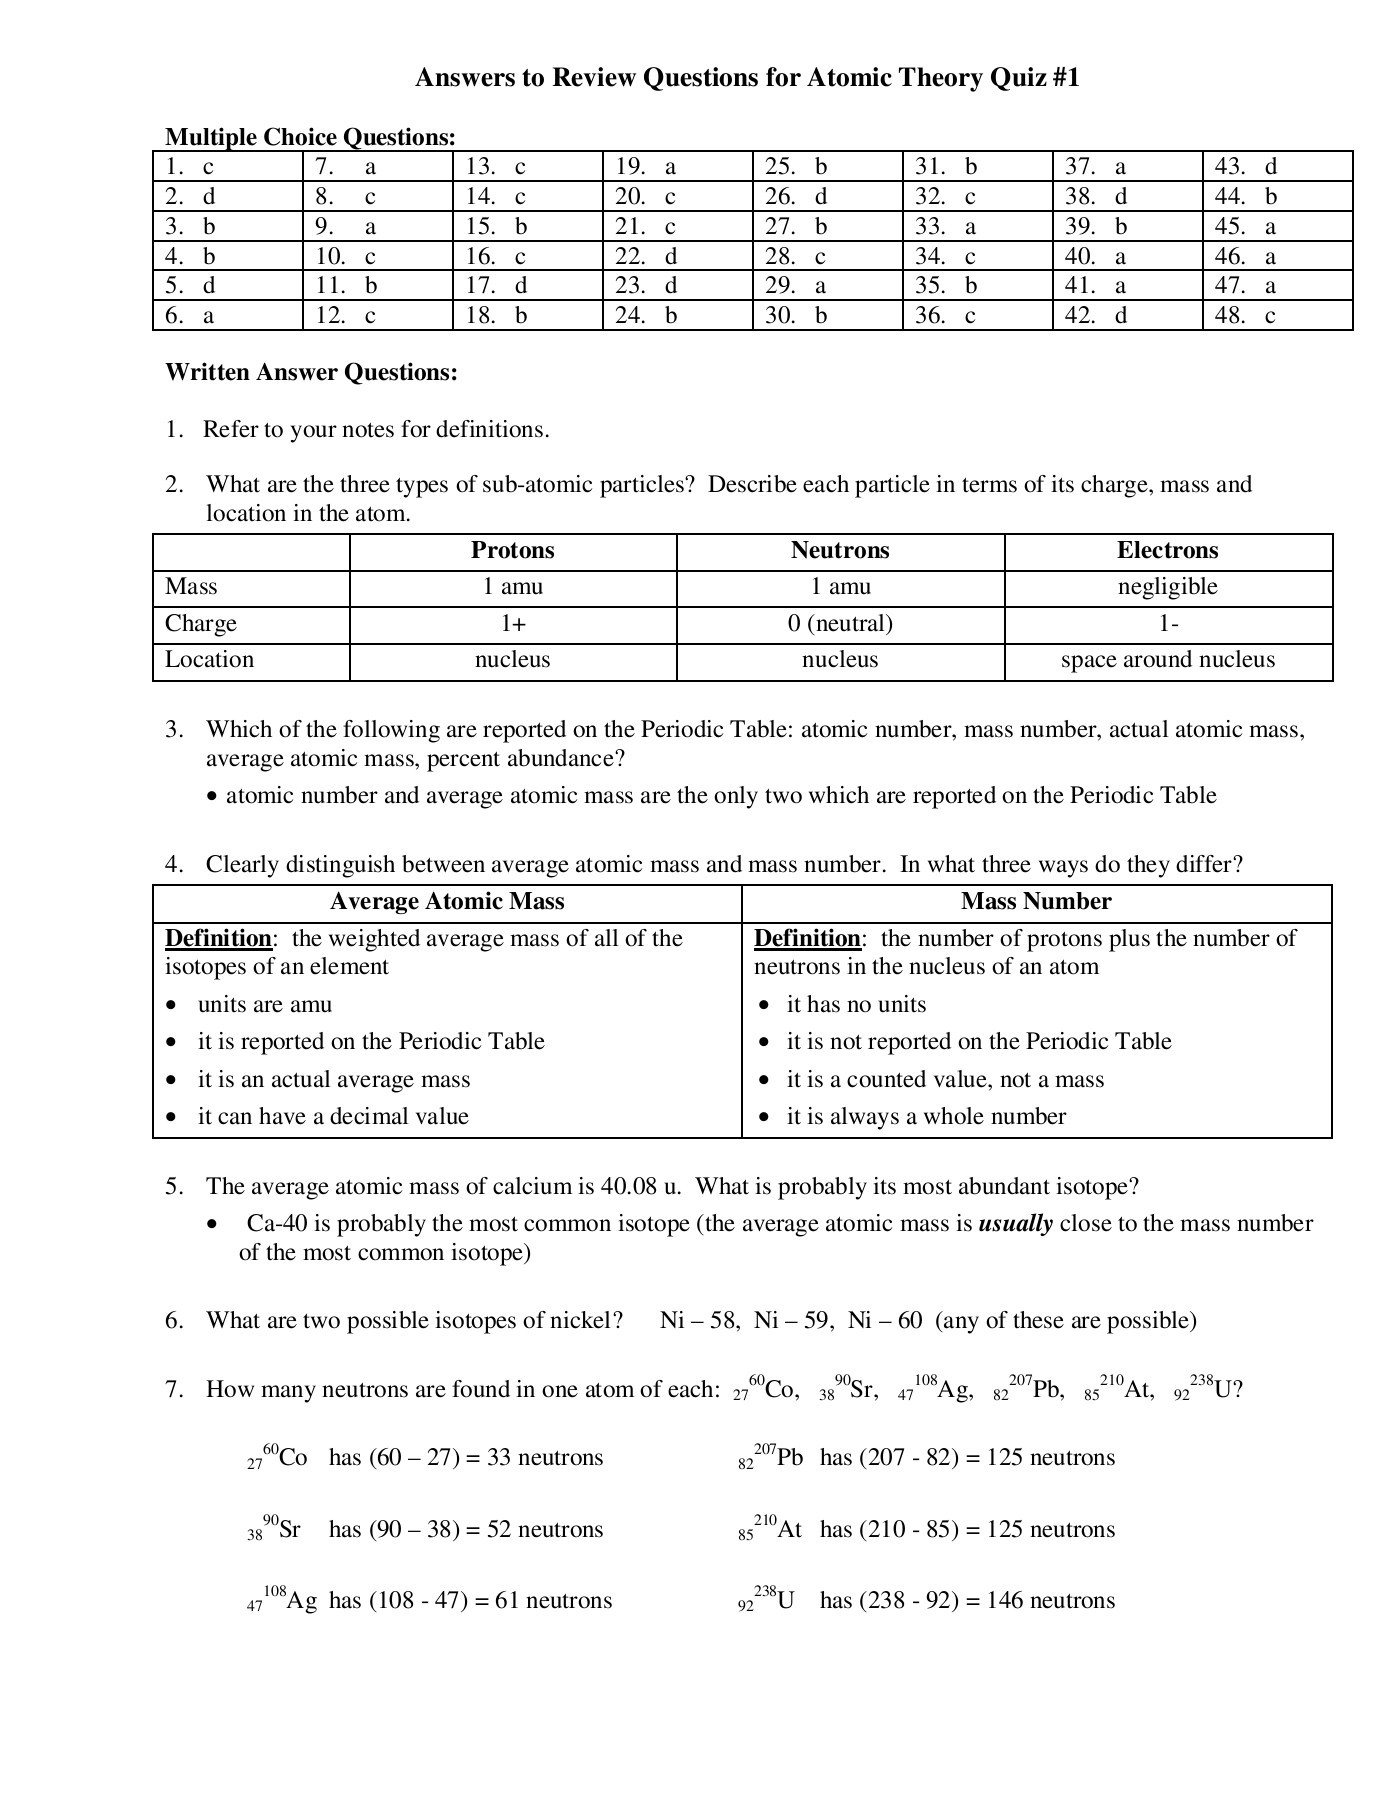 Average atomic Mass Worksheet Answers to Review Questions for atomic theory Quiz 1 Pages